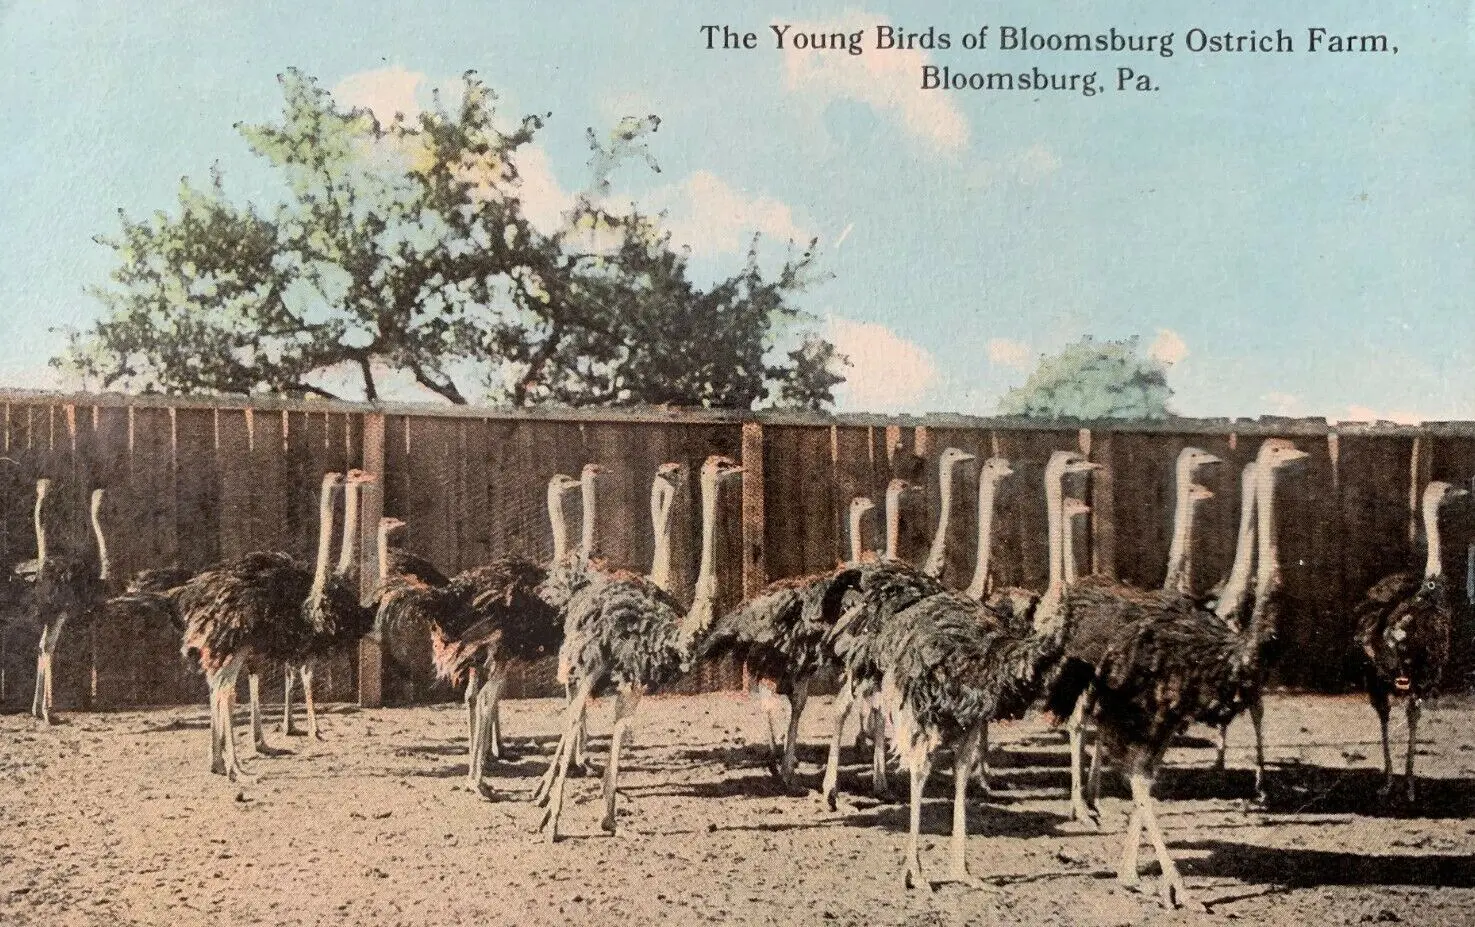 “The Young Birds of Bloomsburg Ostrich Farm”, circa 1913